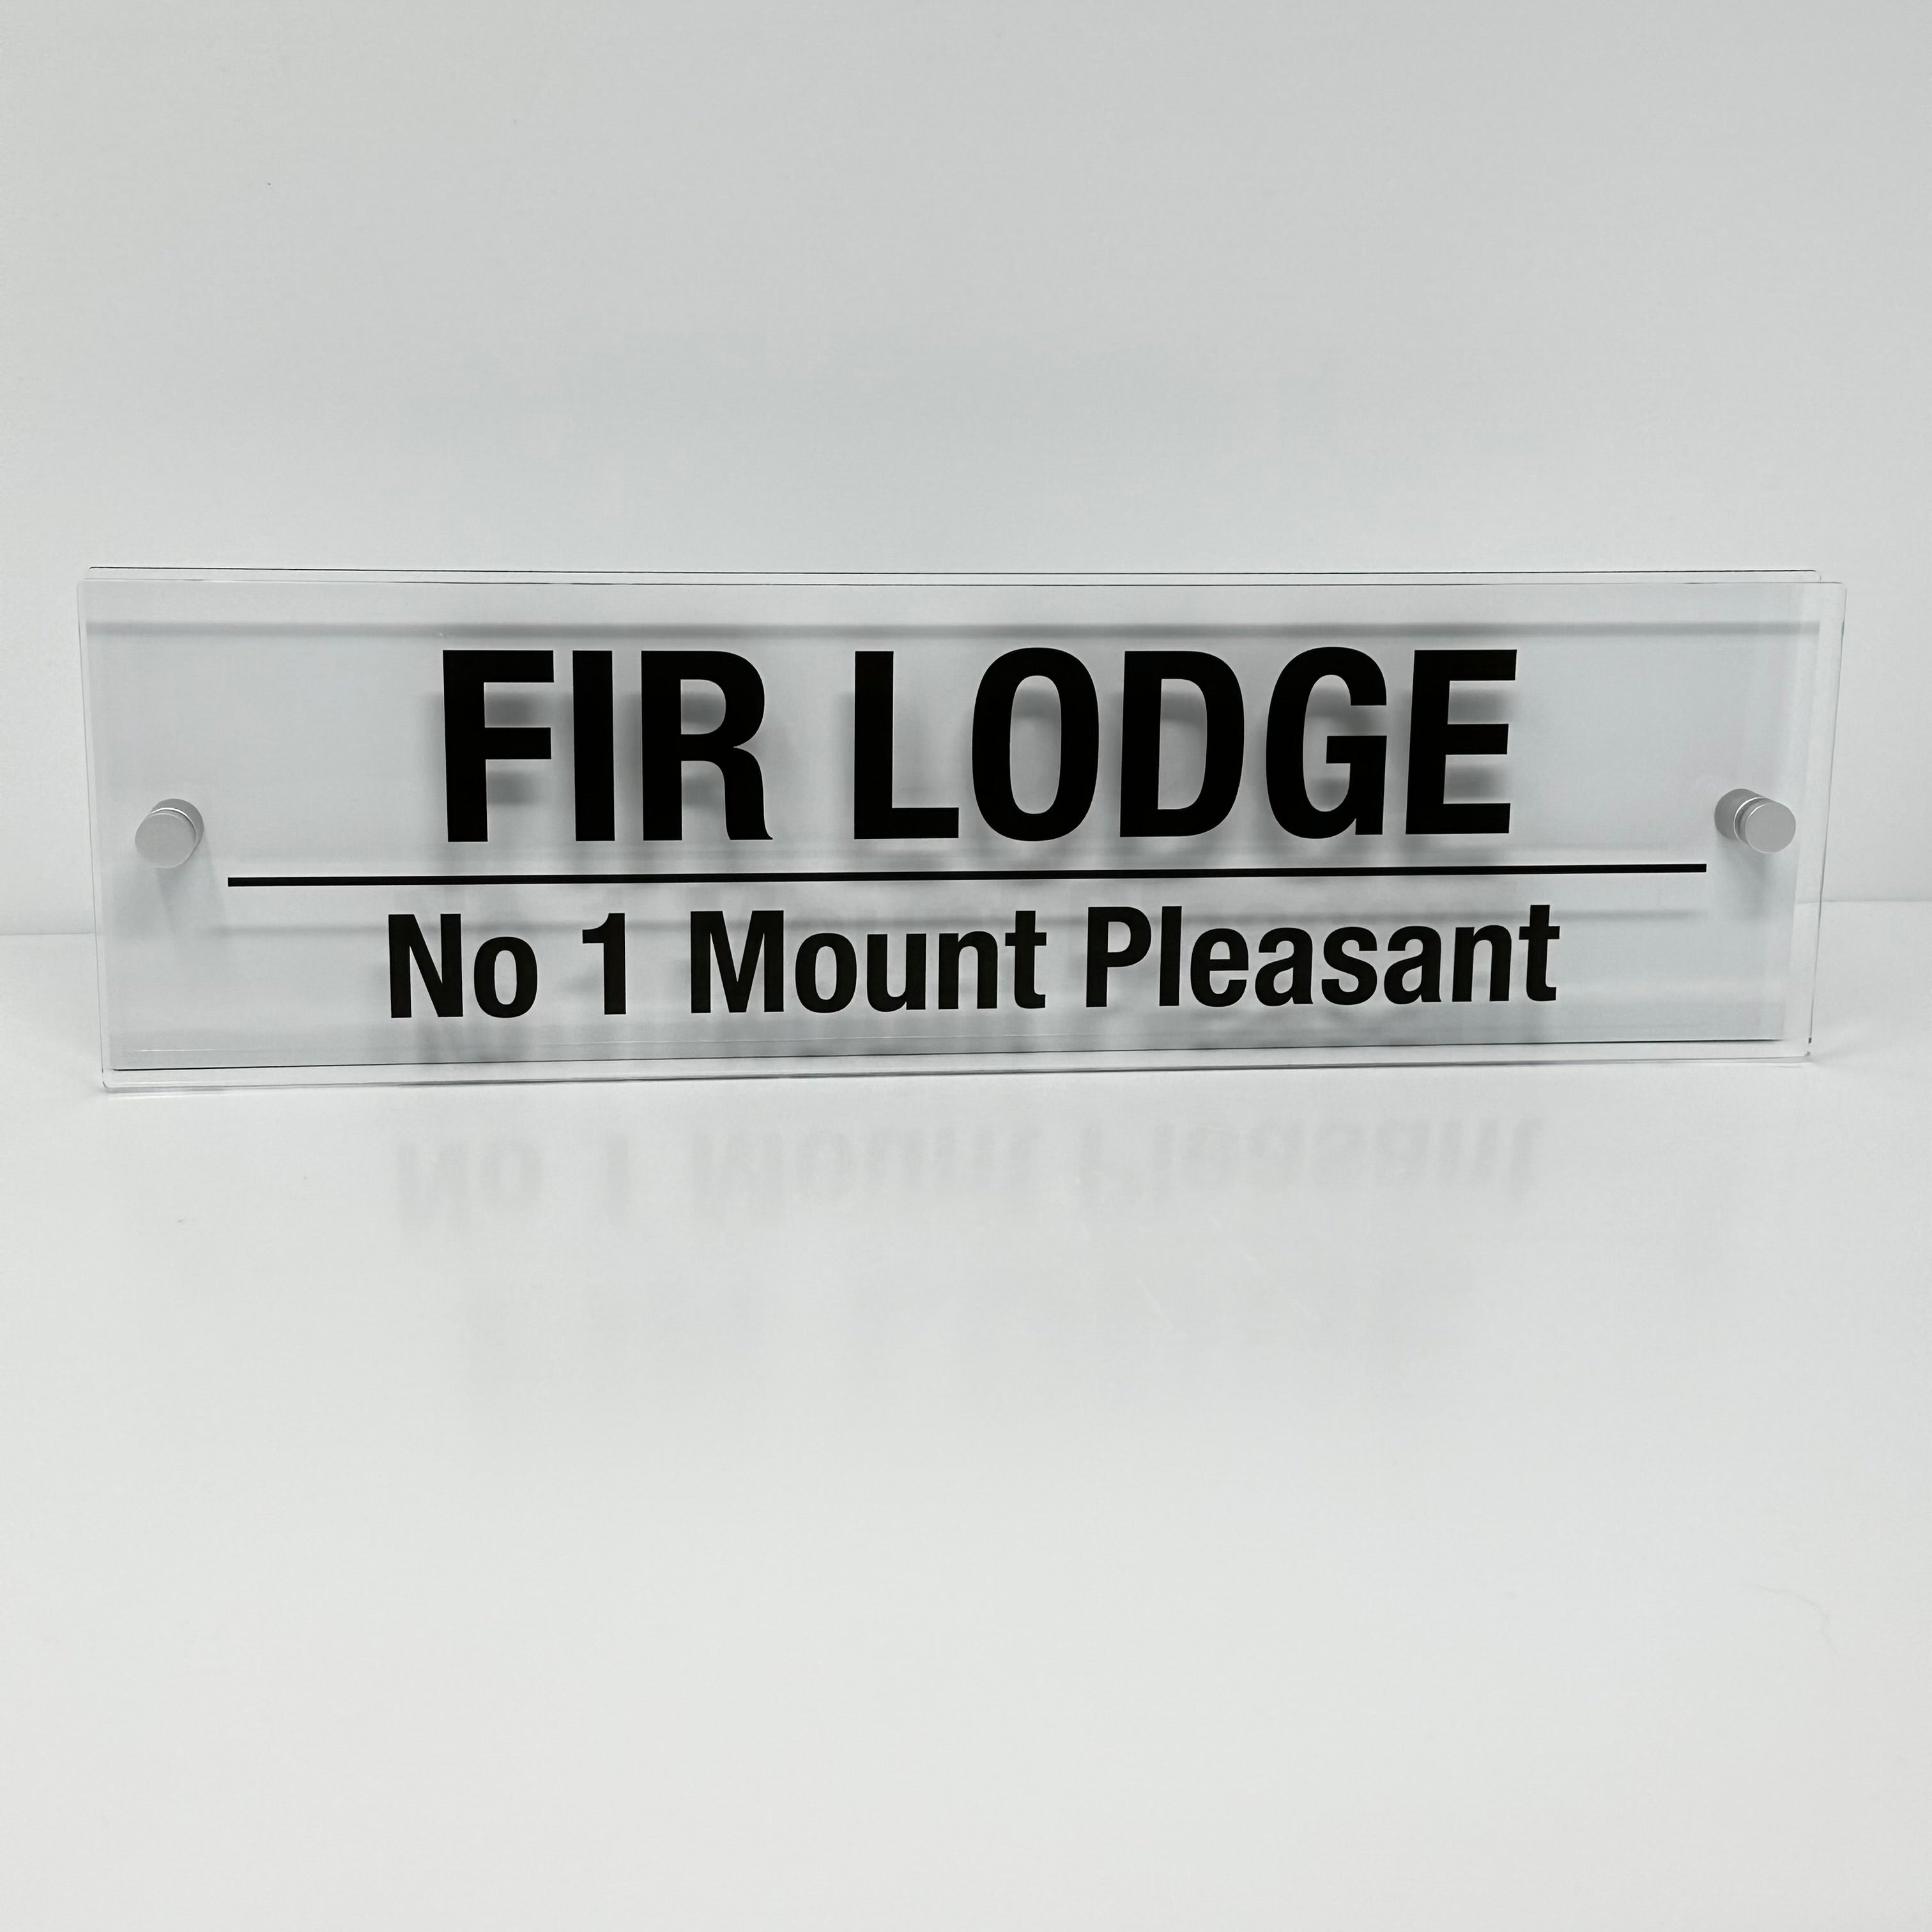 The Fir Lodge Modern House Sign with Perspex Acrylic Front, White Rear Panel and Satin Silver Stand Off Fixings ( Size - 42cm x 12cm )